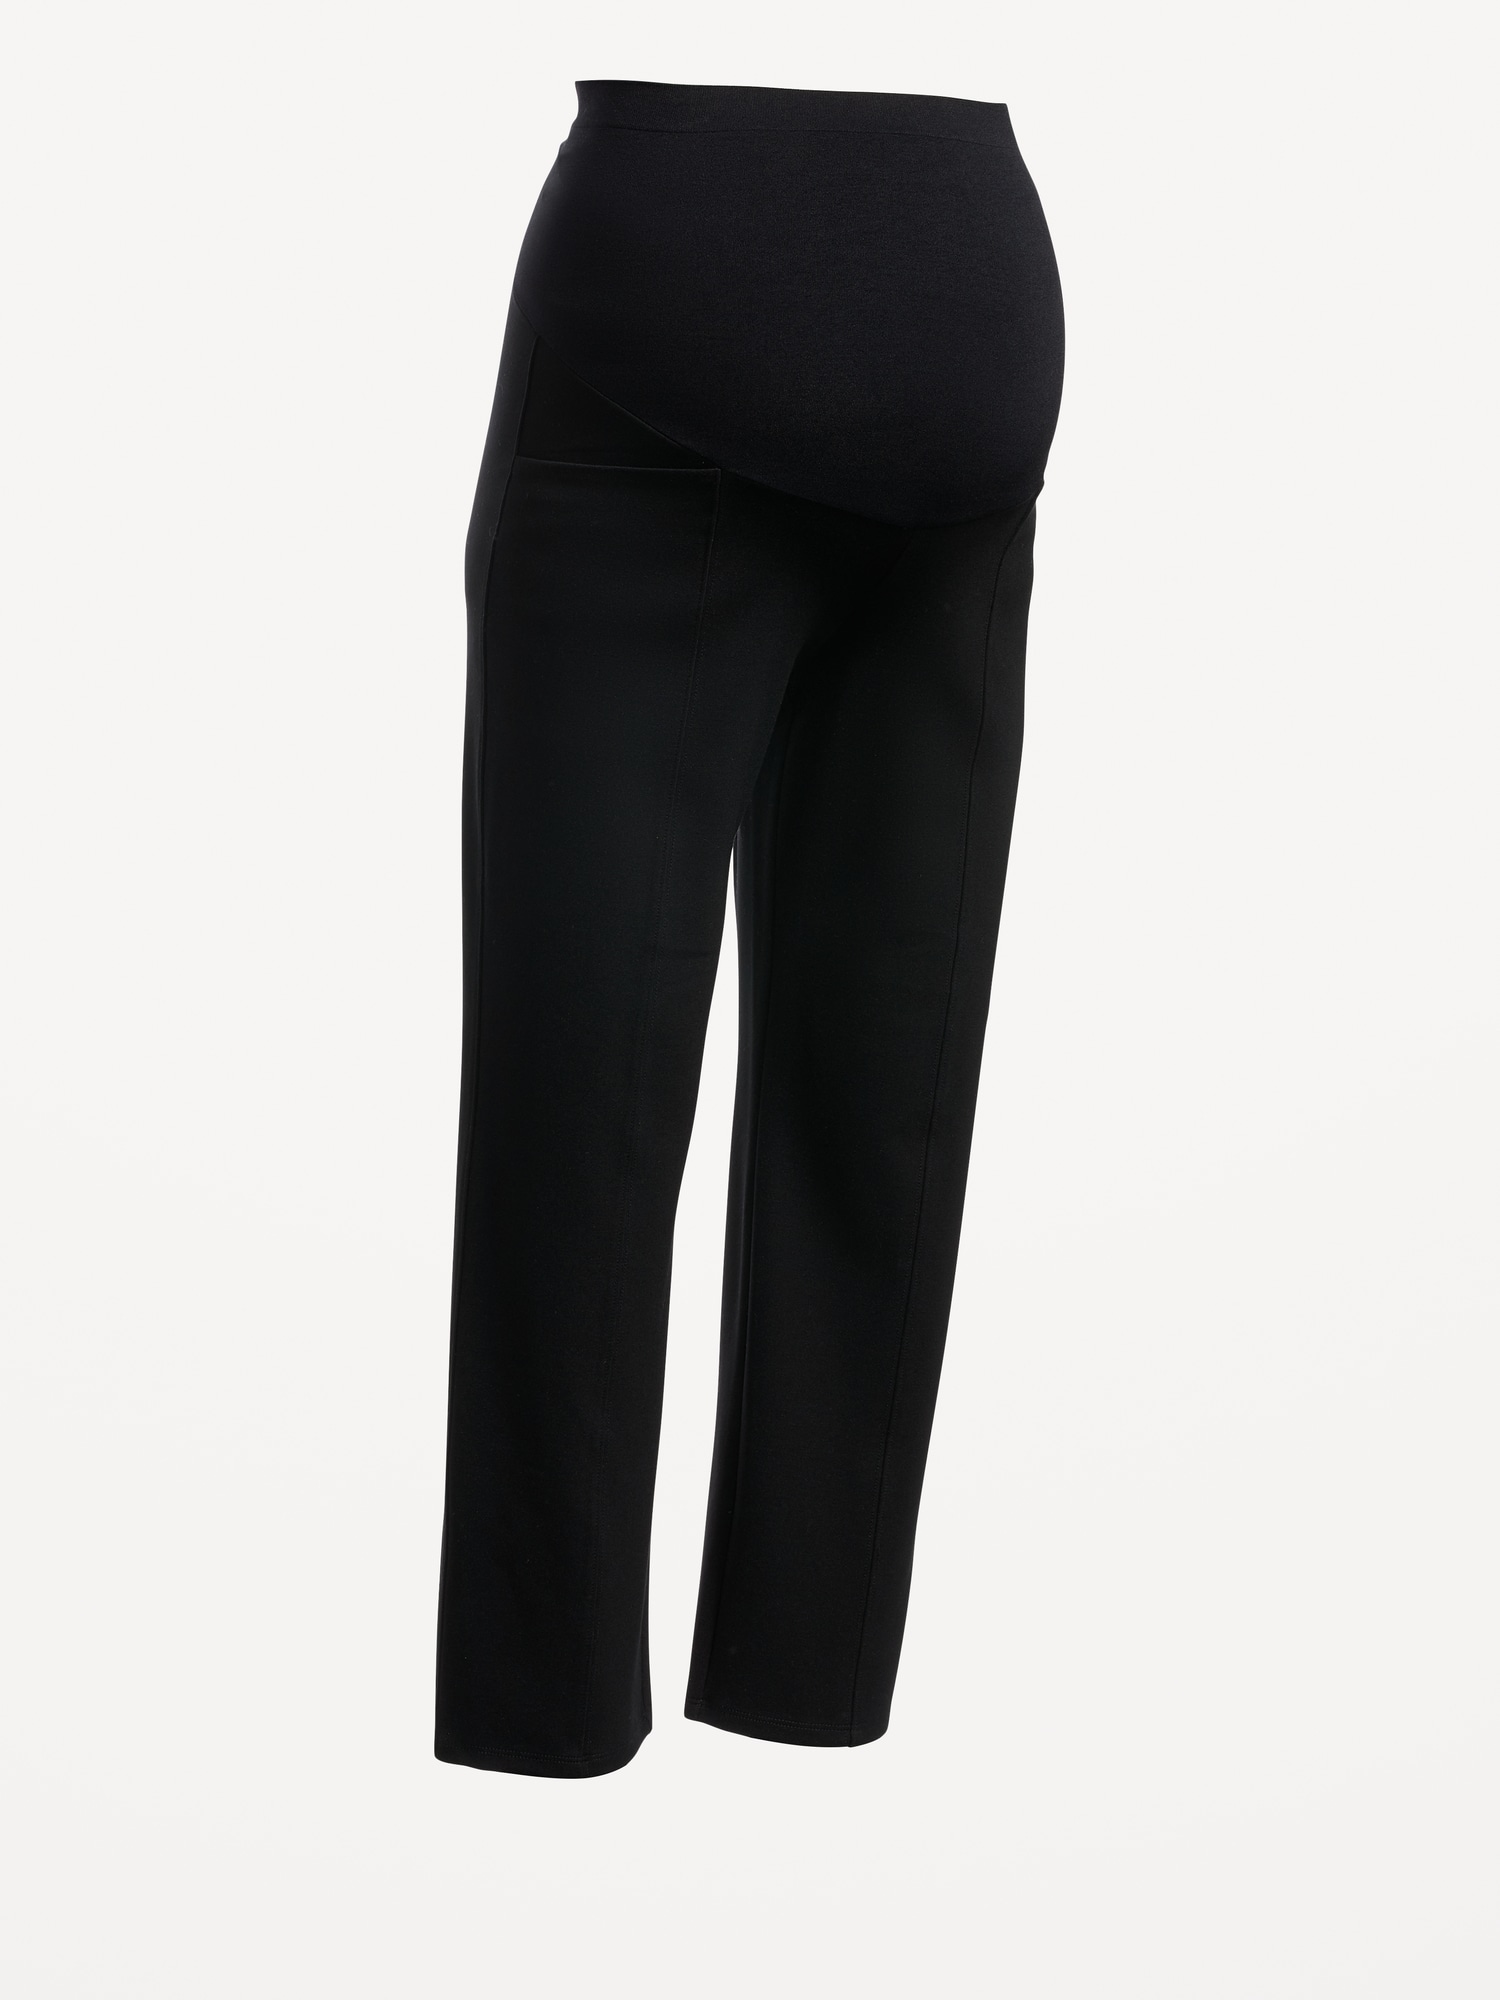 Stiletto Pant - Stretch Chic Maternity Work Pant | HATCH Collection